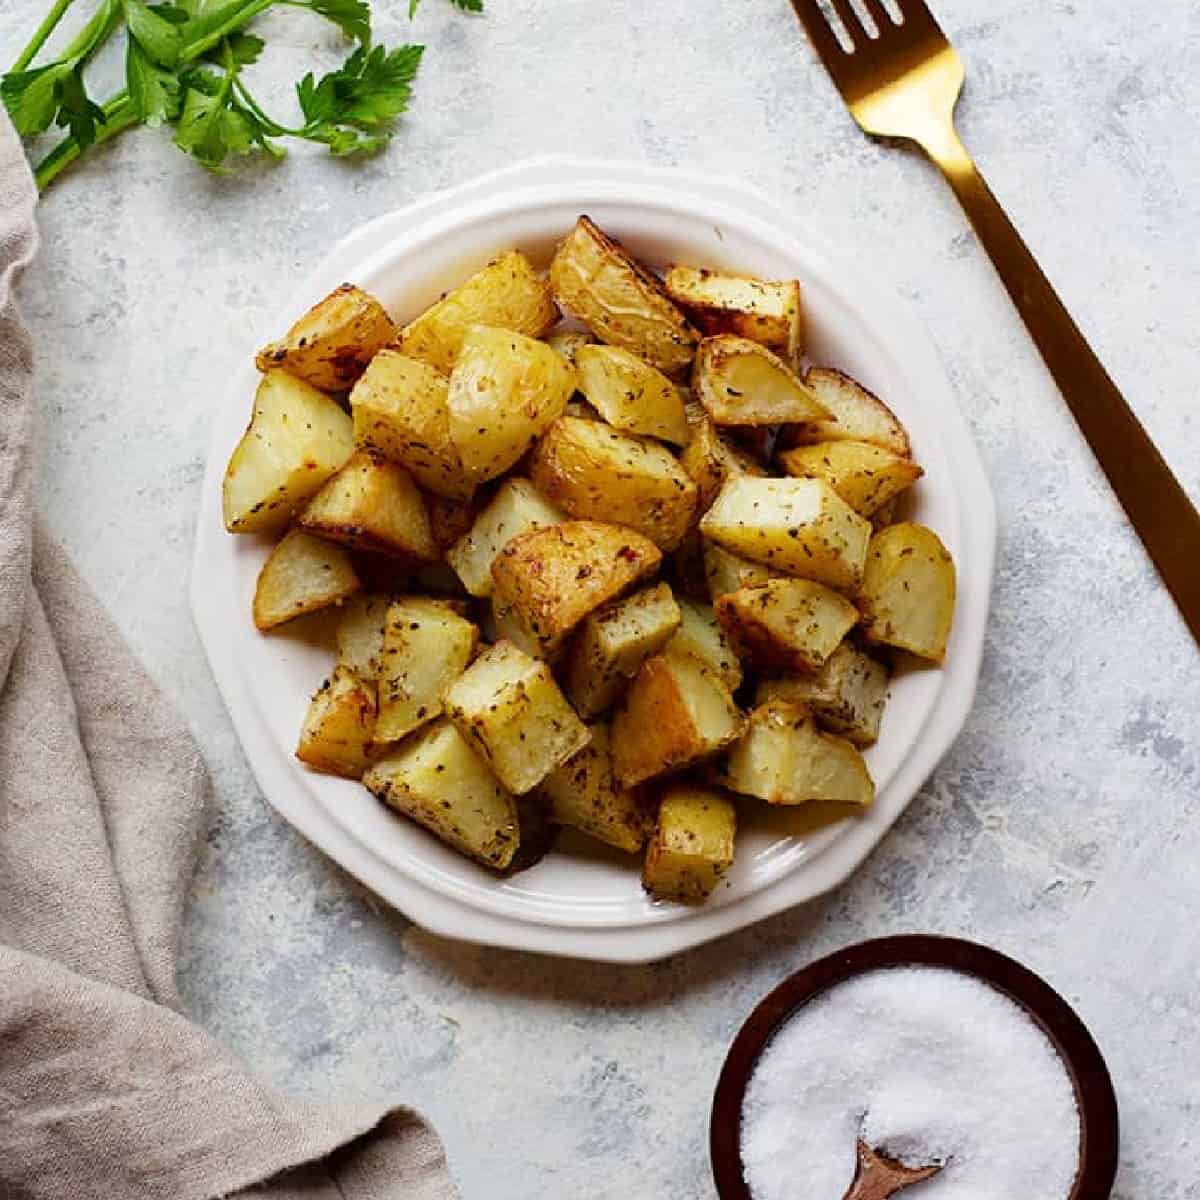 Christmas side dishes This oven roasted potatoes recipe is easy and makes the perfect side dish. Flavored with garlic and roasted to perfection, these potatoes are irresistible. These potatoes are crispy on the inside and tender on the inside, and are the perfect addition to your dinner table. 
